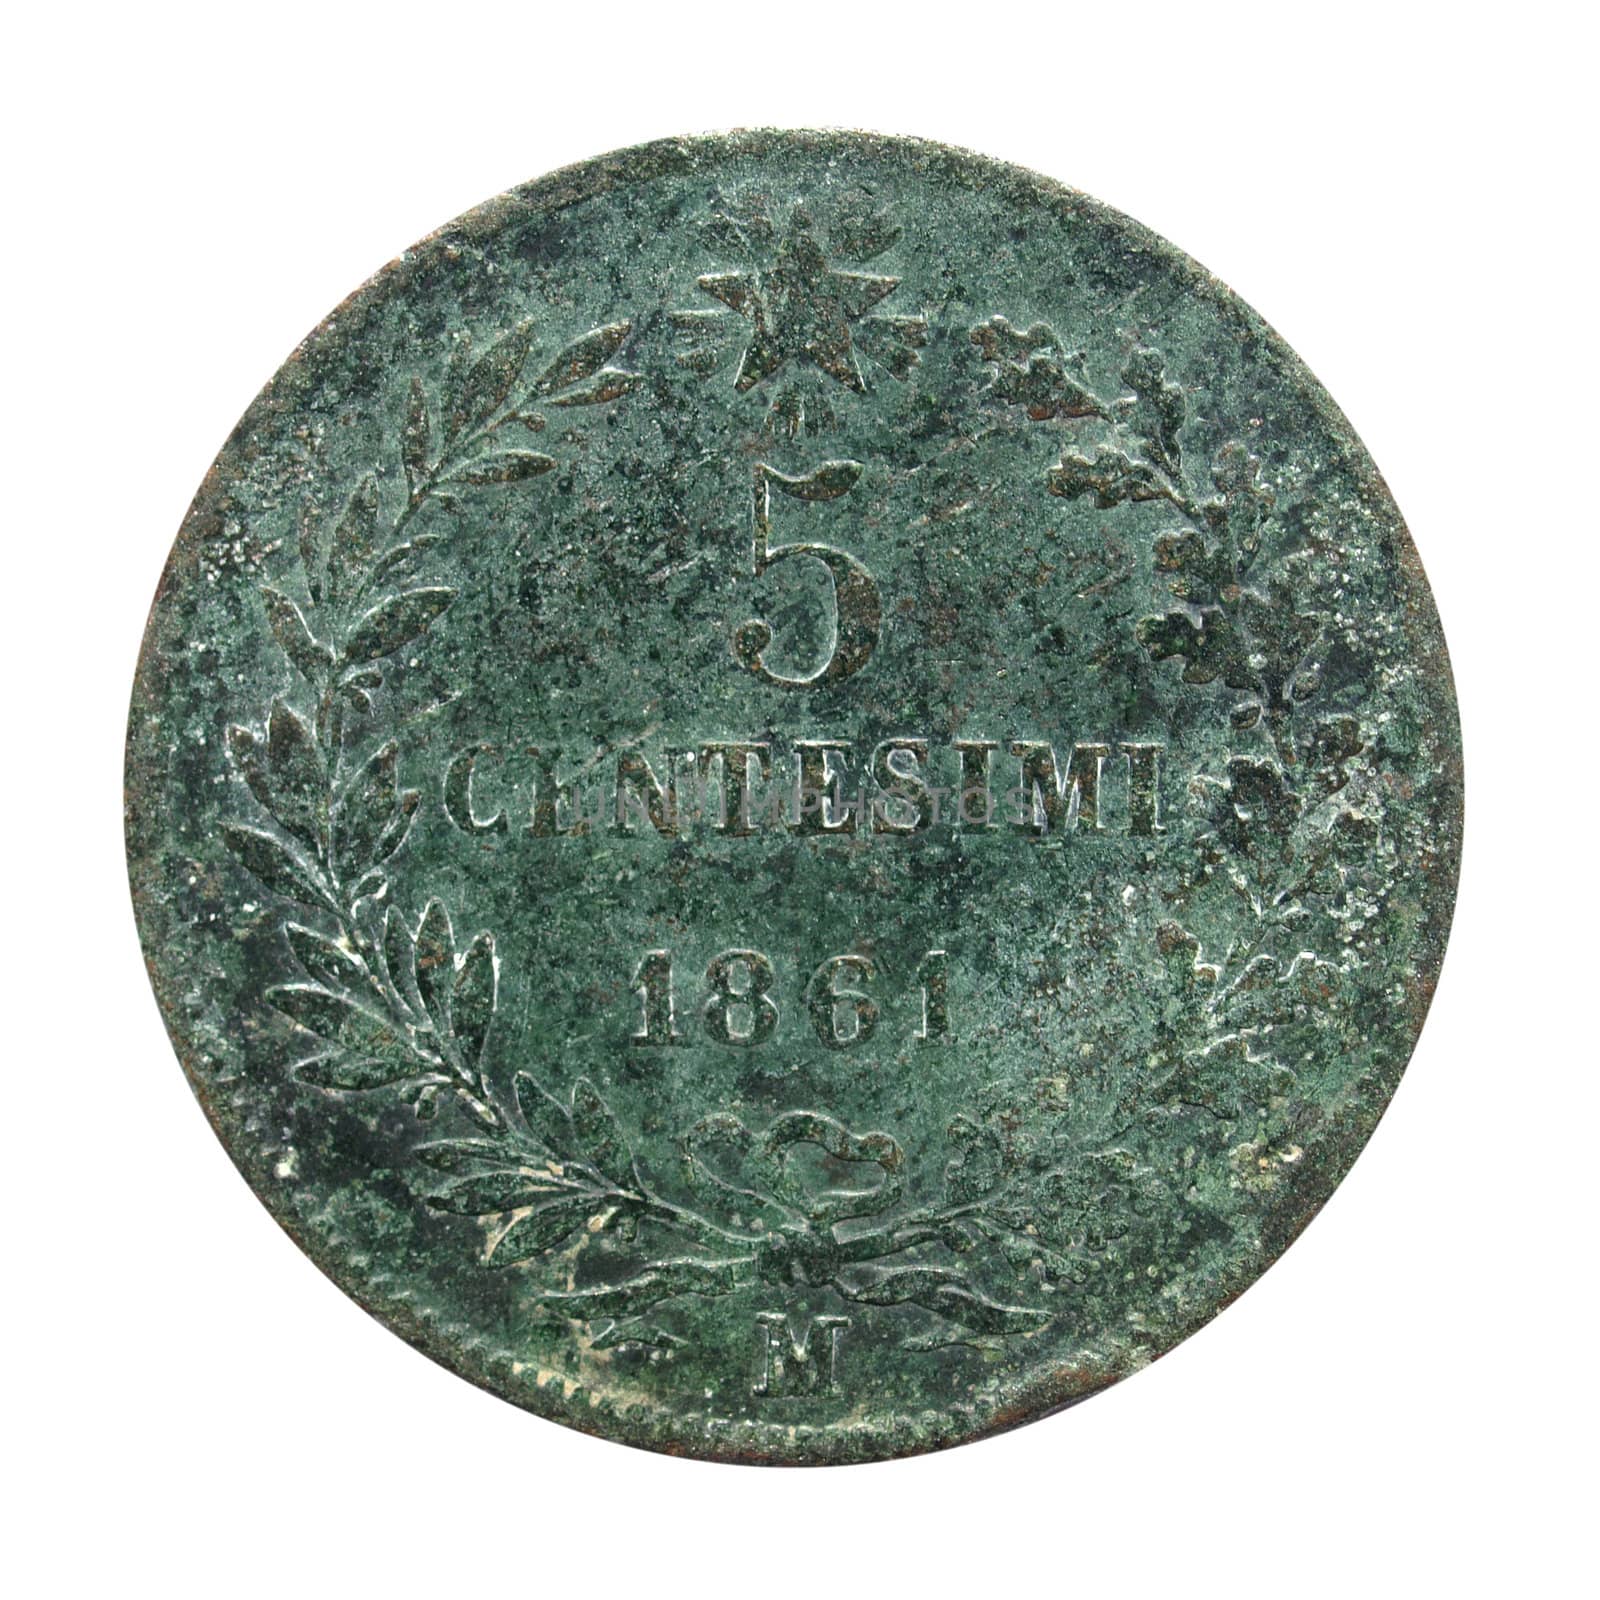 Close up of a grunge vintage Italian coin